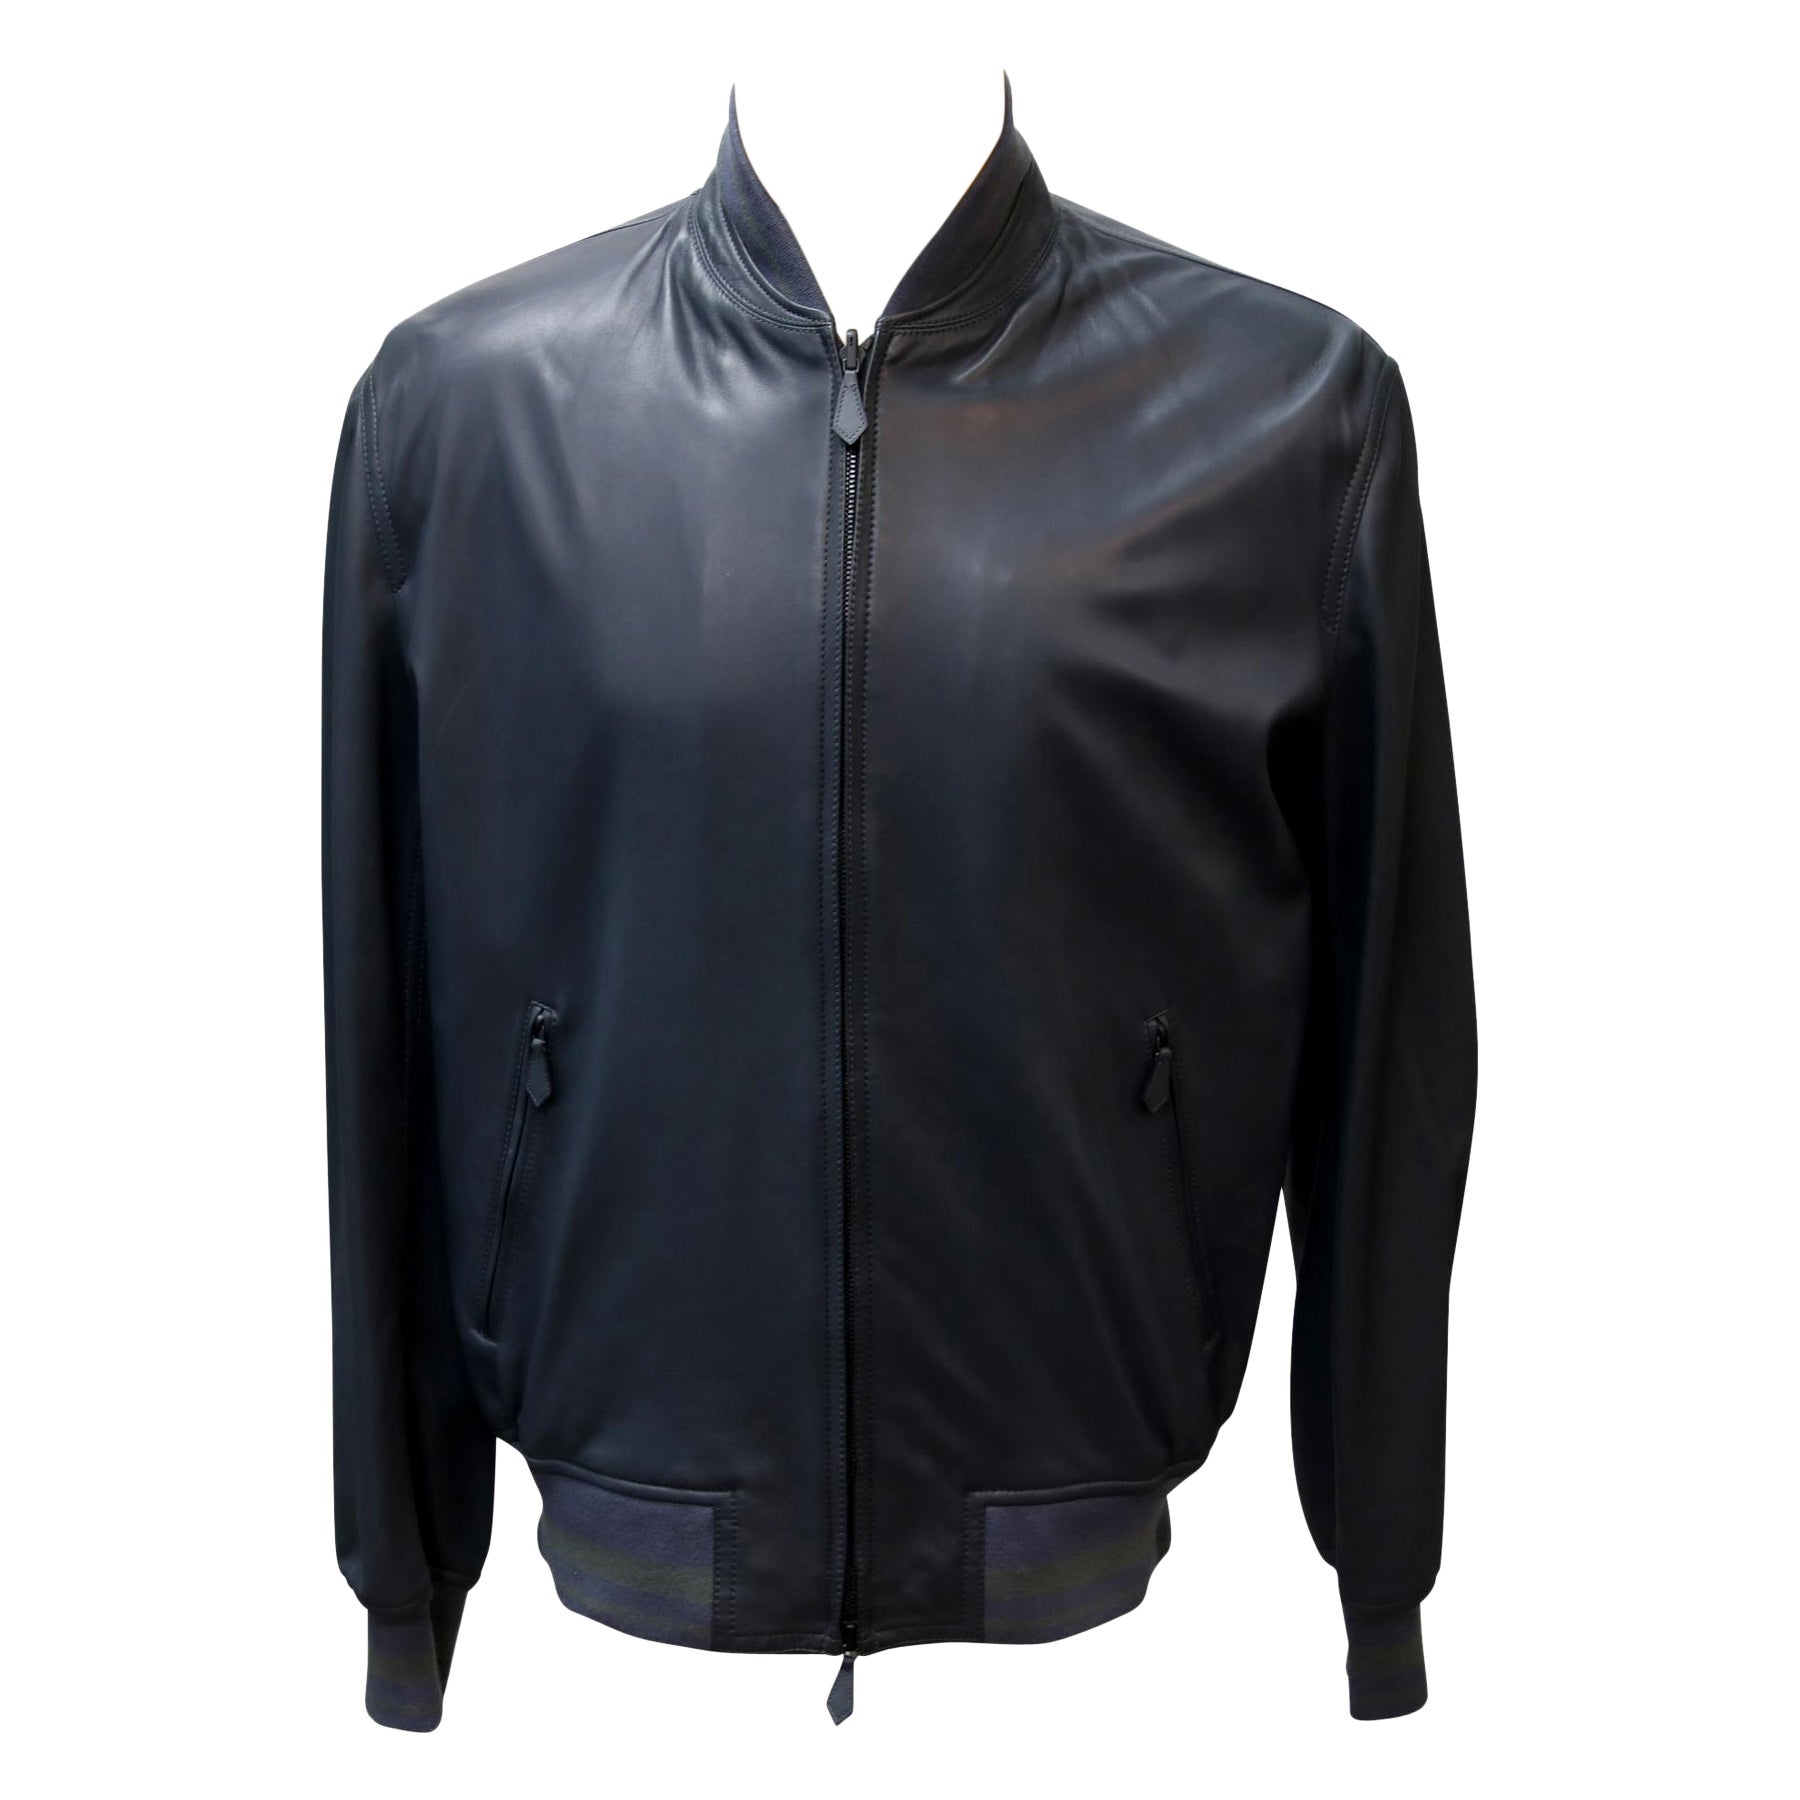 Hermes Dark Blue Signature Leather Reversible Bomber With Knit Trim 48 Jacket